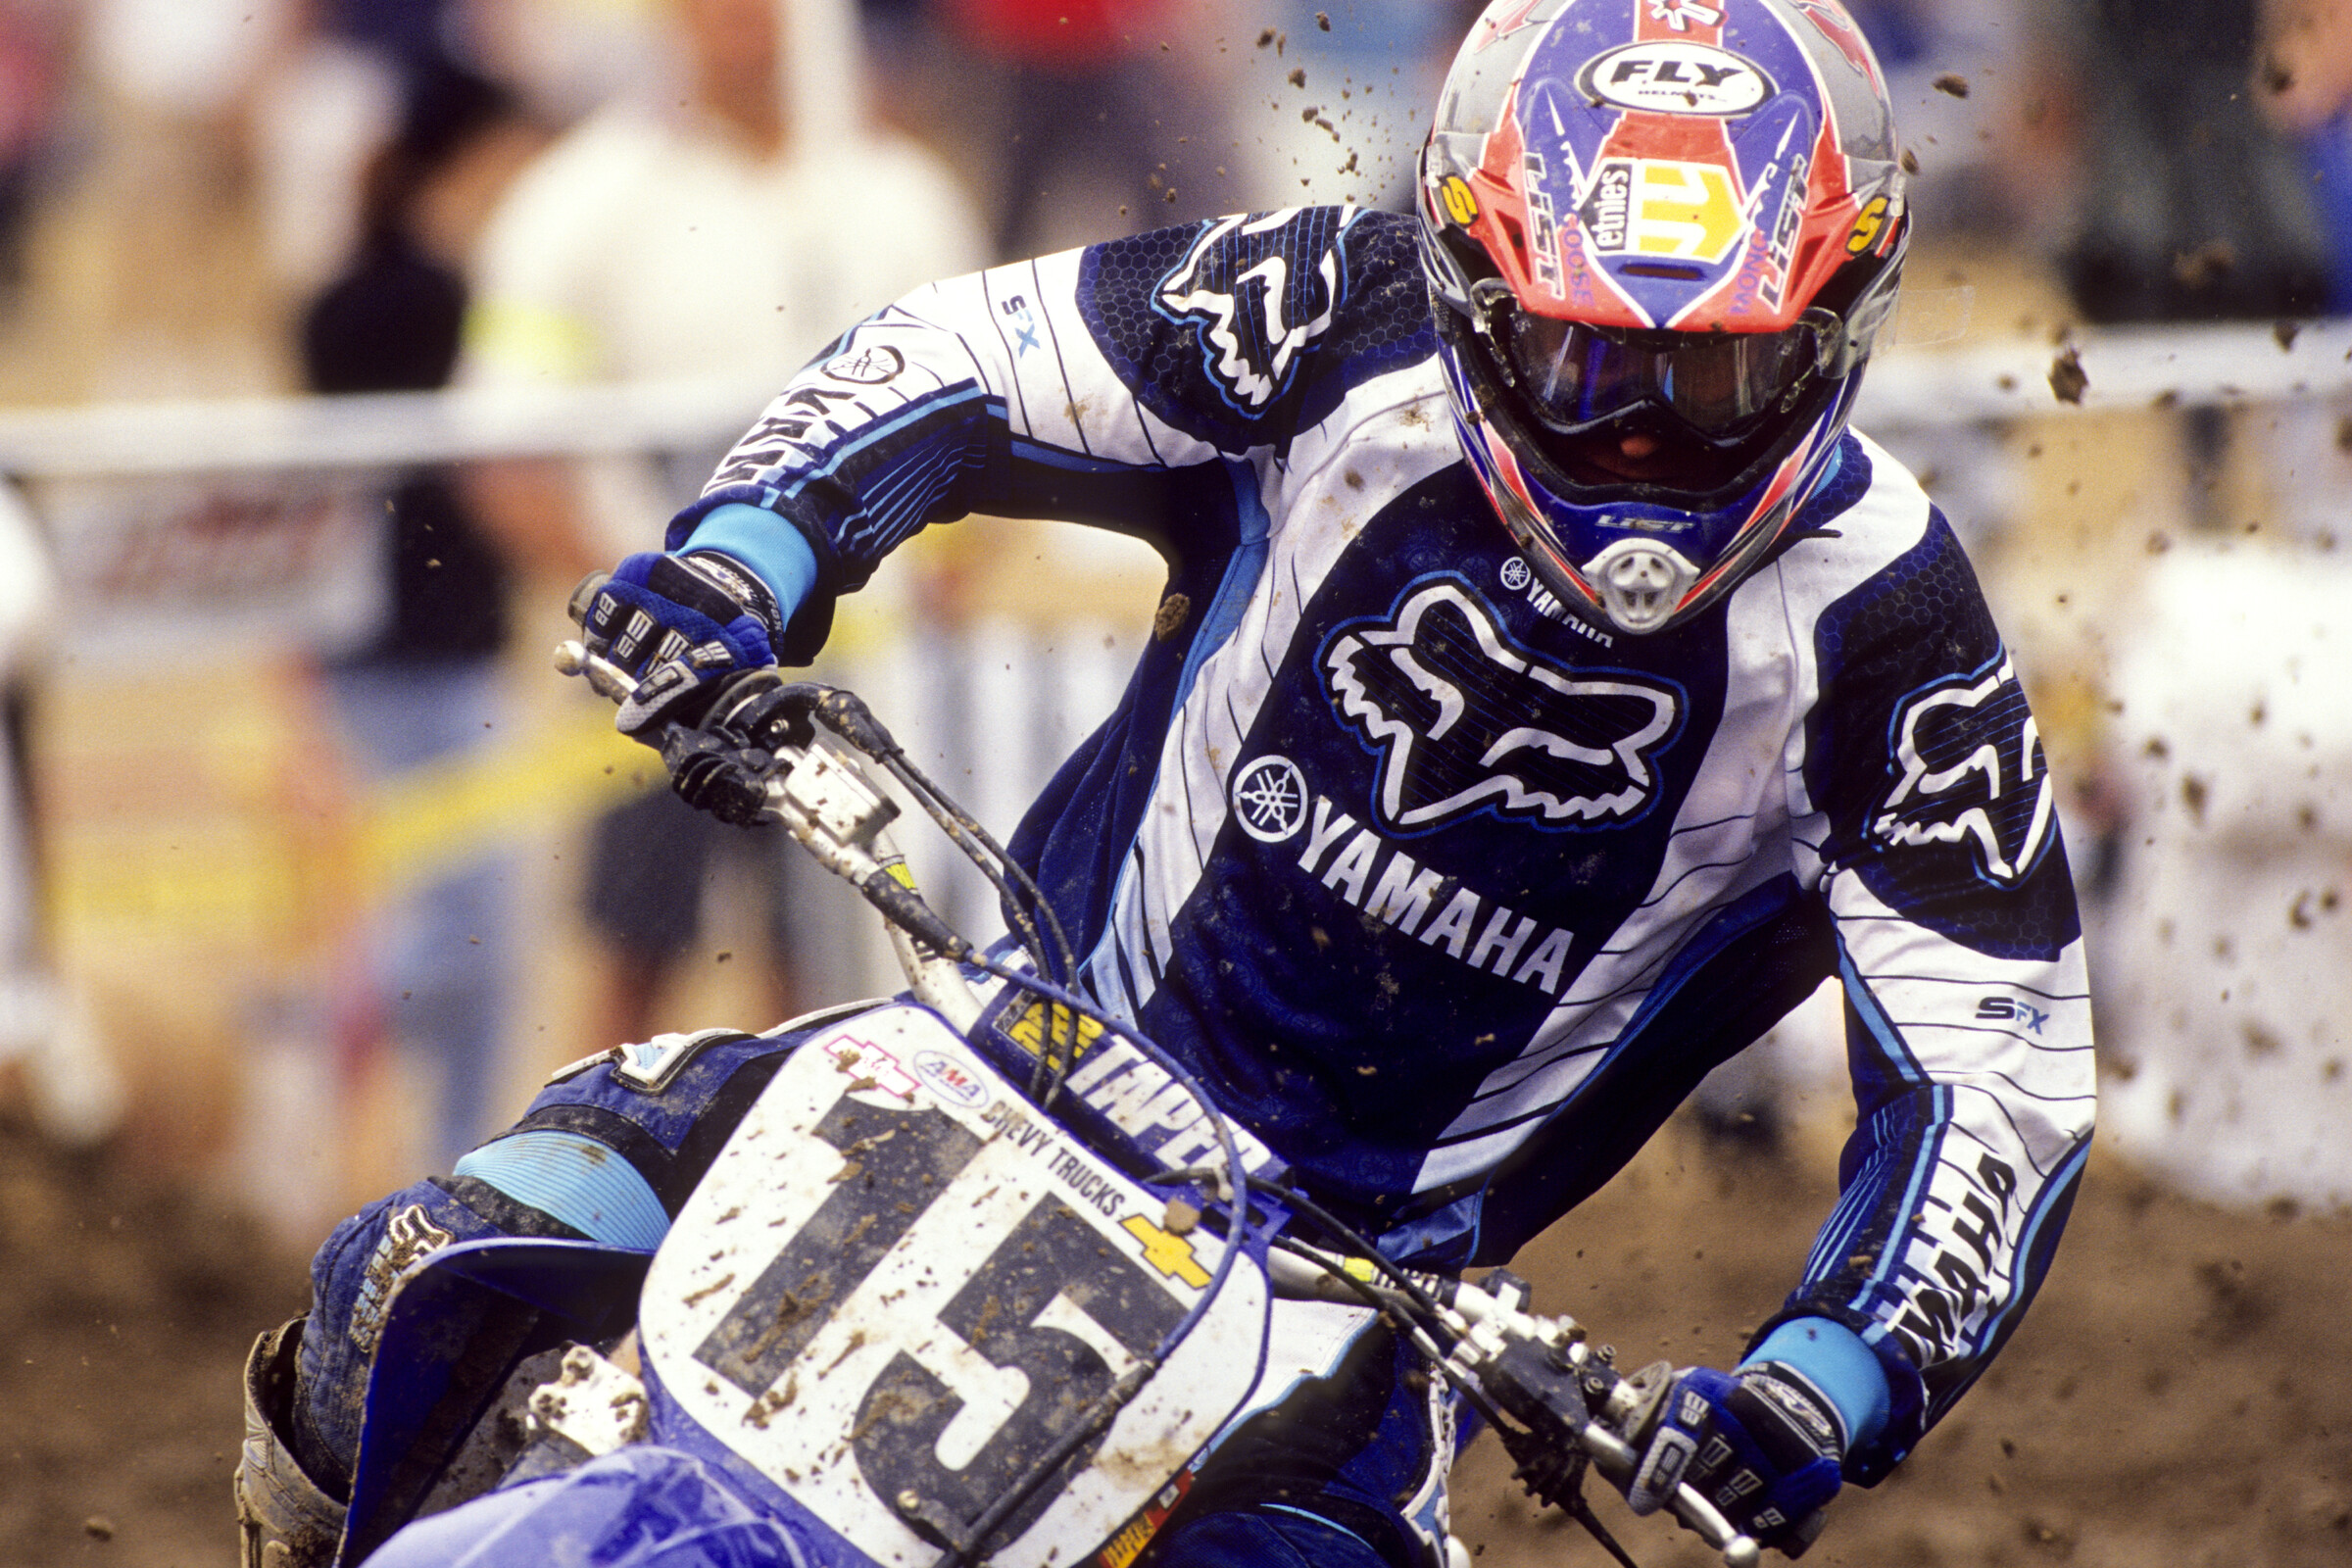 Steve Matthes 15 Reasons to Celebrate Tim Ferry on His Birthday